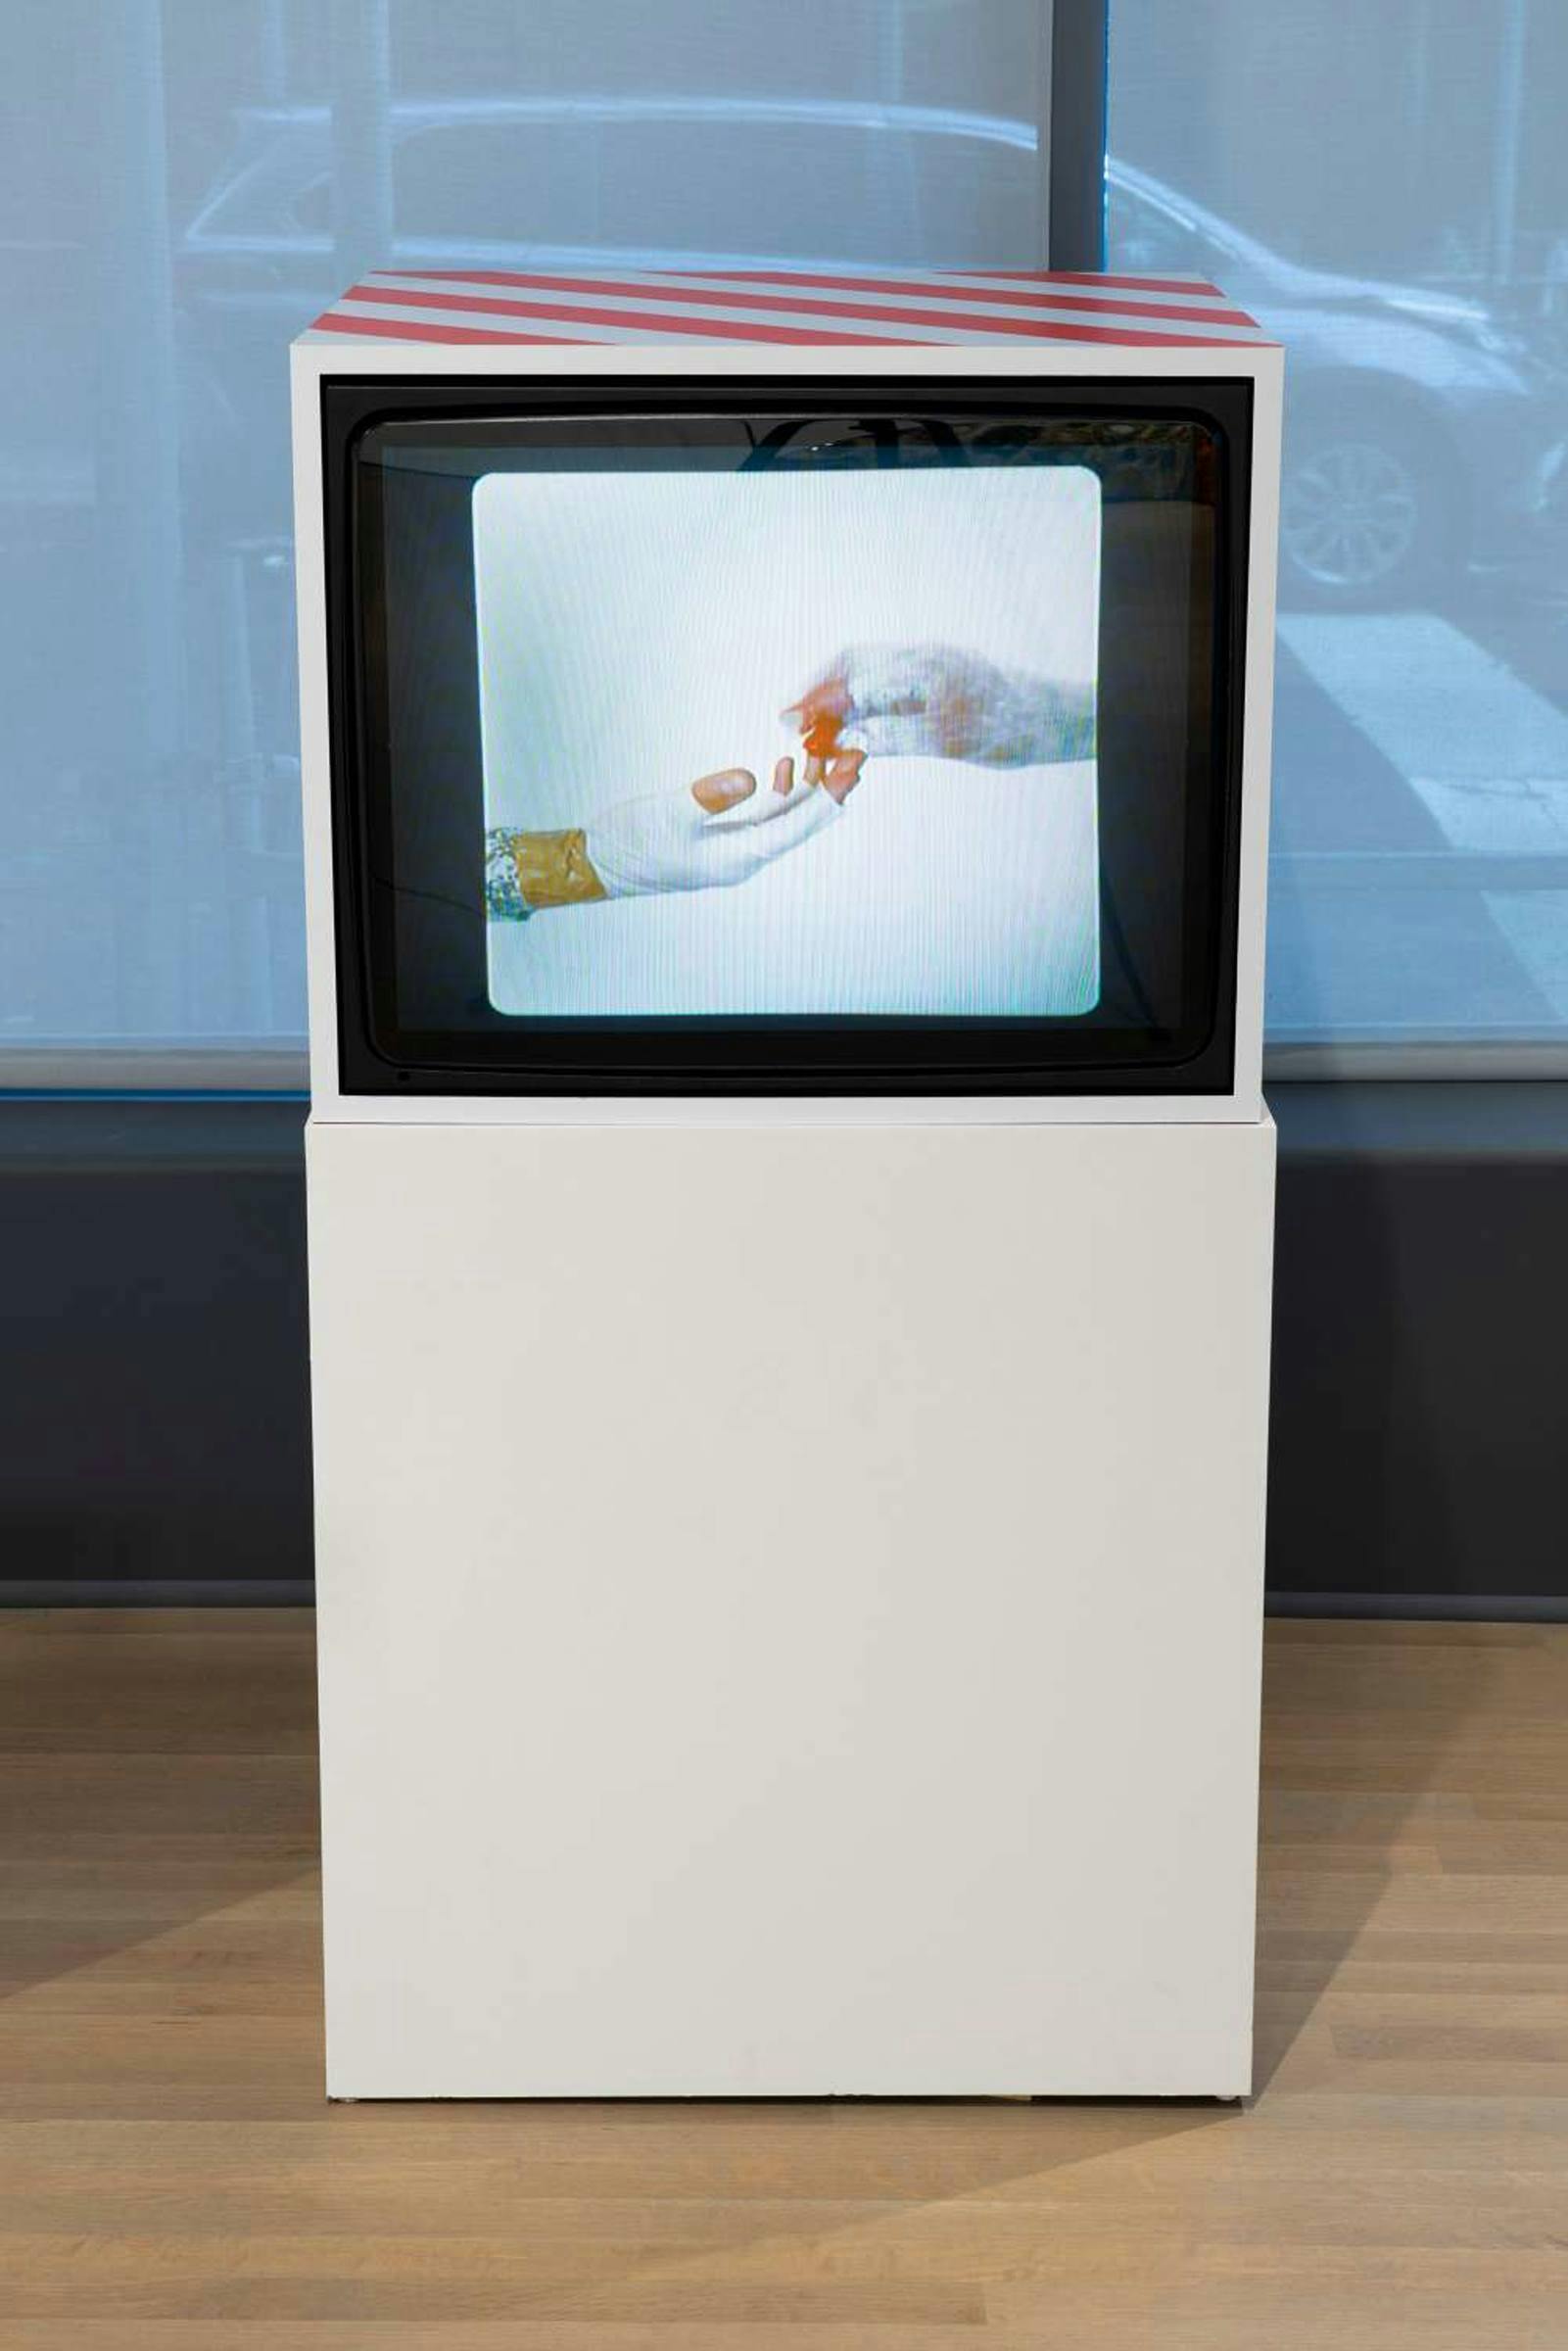 TV screen stands in white box stand with image of two hands reaching out to each other.